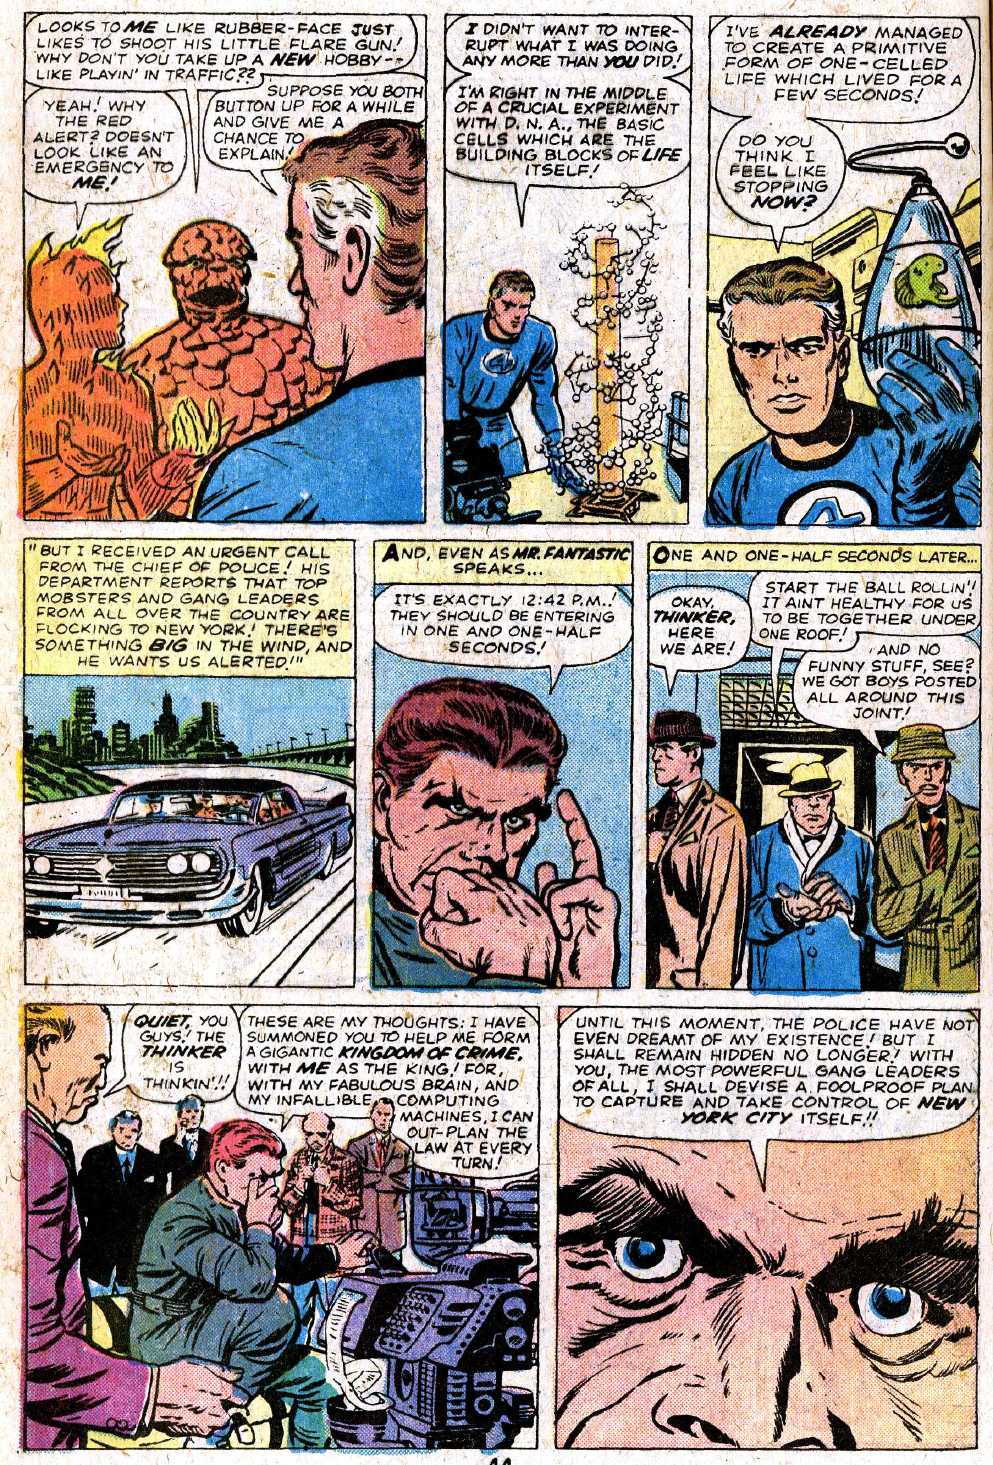 Read online Giant-Size Fantastic Four comic -  Issue #5 - 46